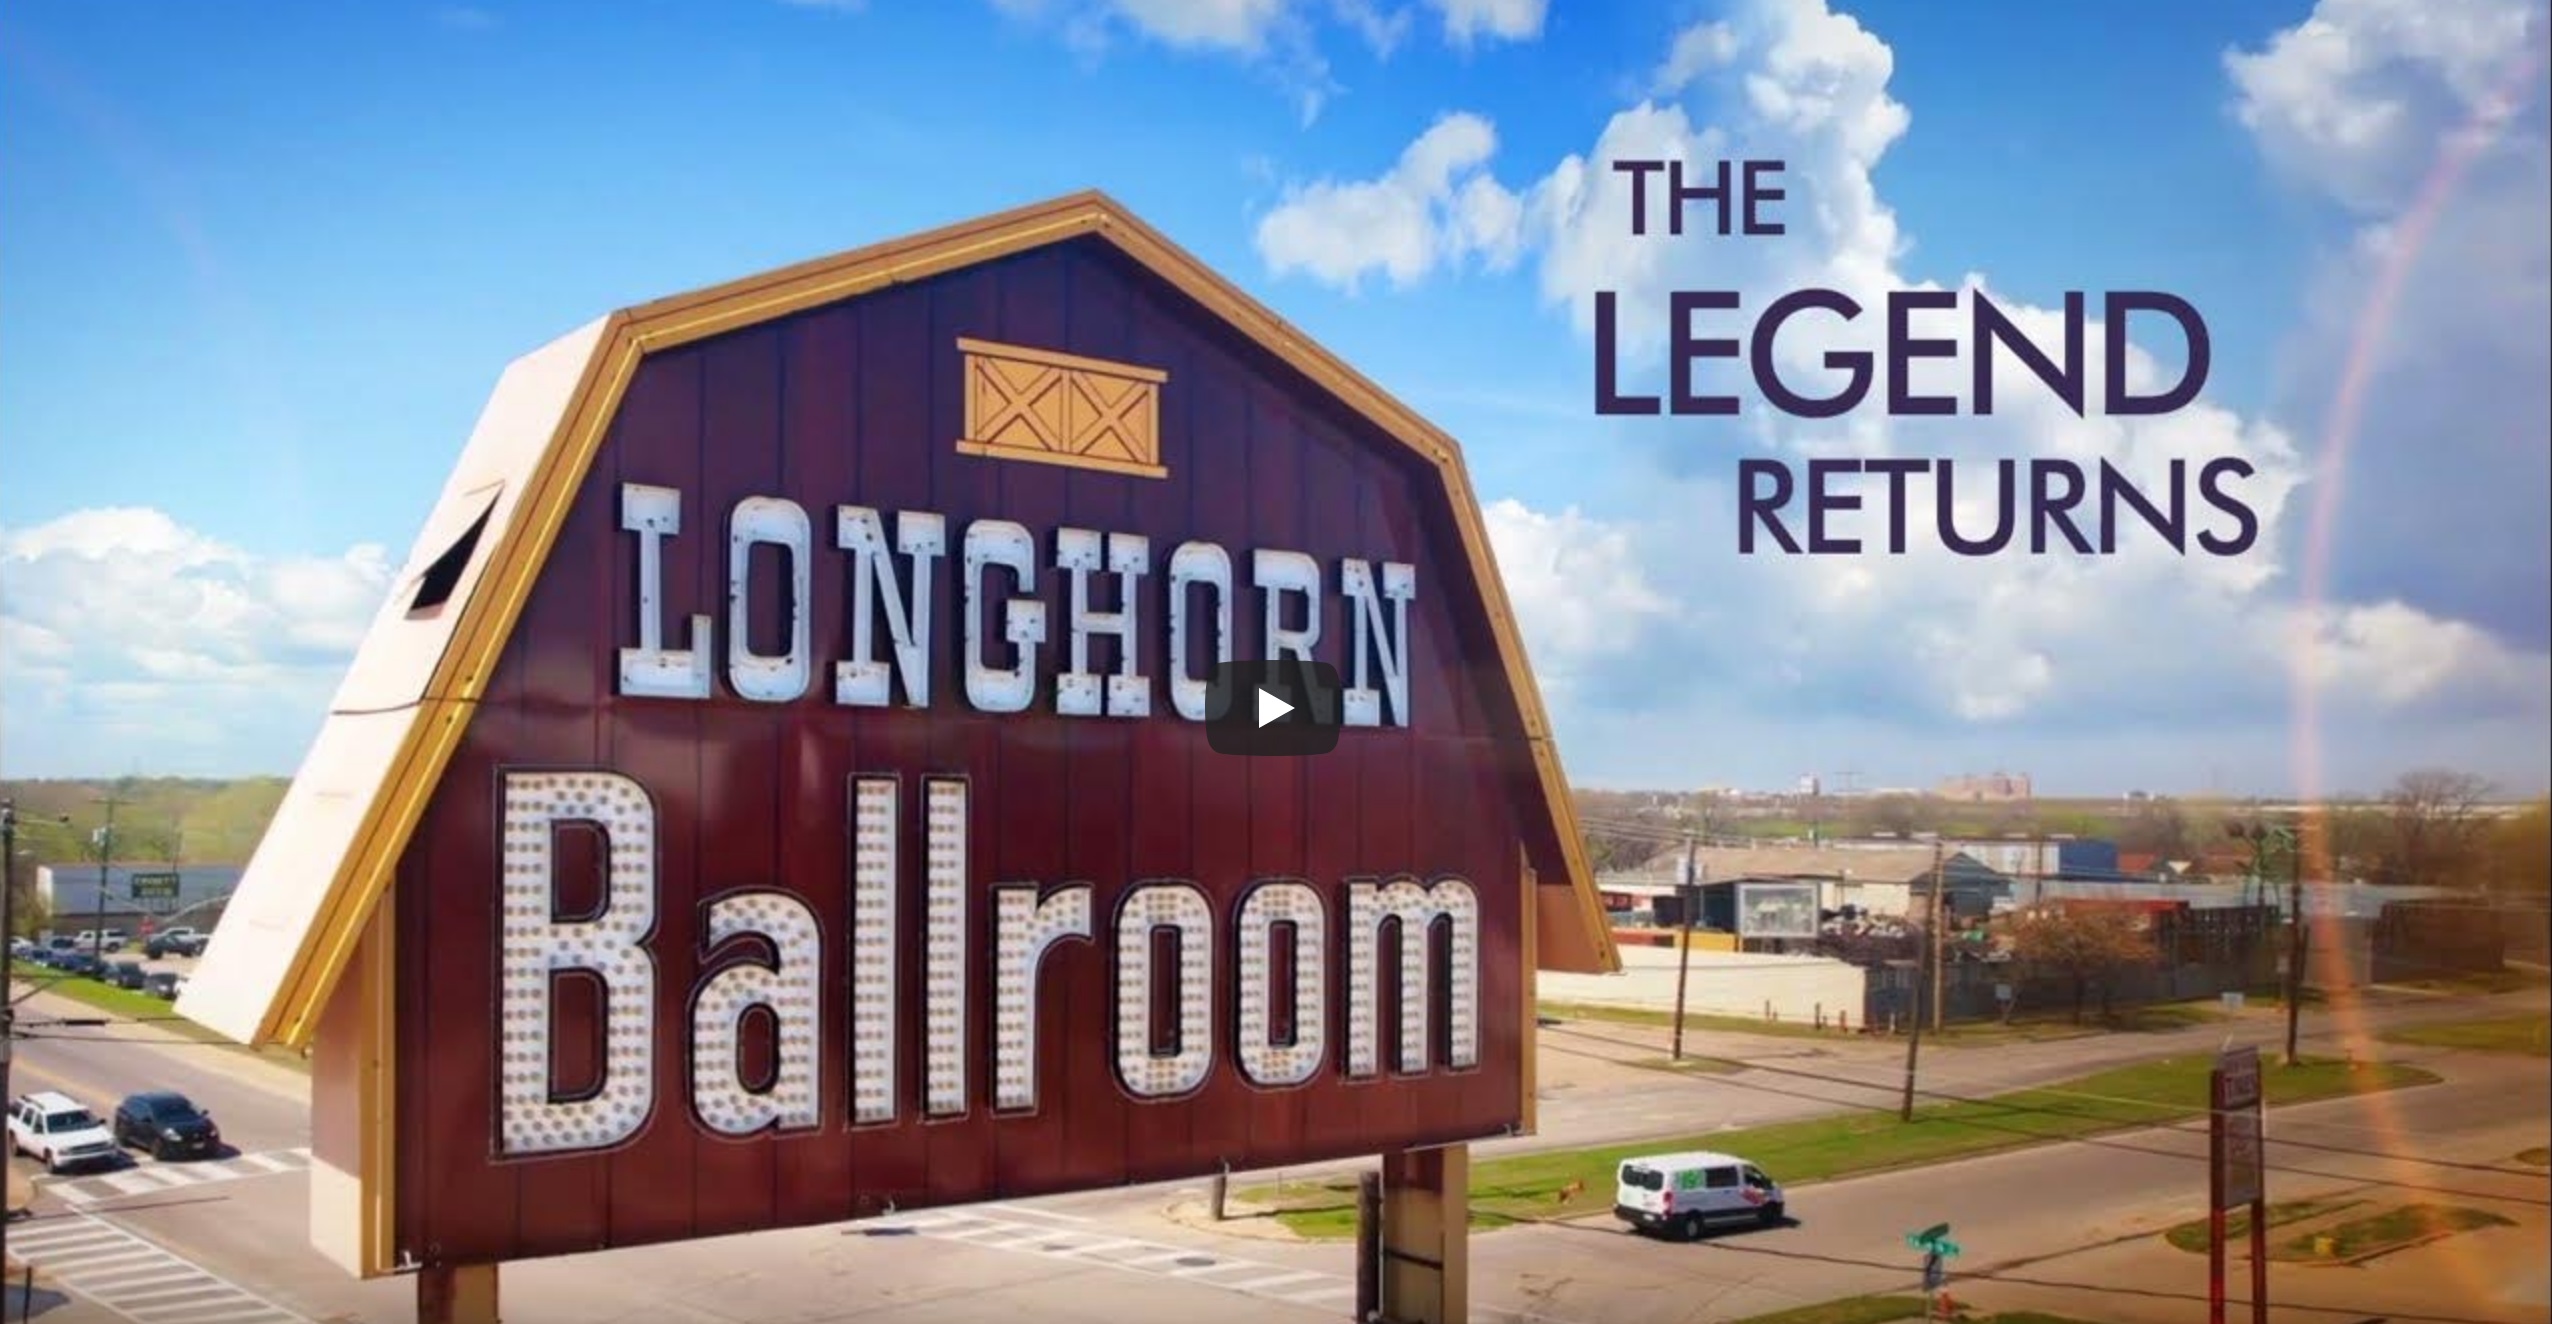 Asleep at the Wheel, Old Crow Medicine Show, Morgan Wade, Emmylou Harris, and more to grace the famed Longhorn Ballroom